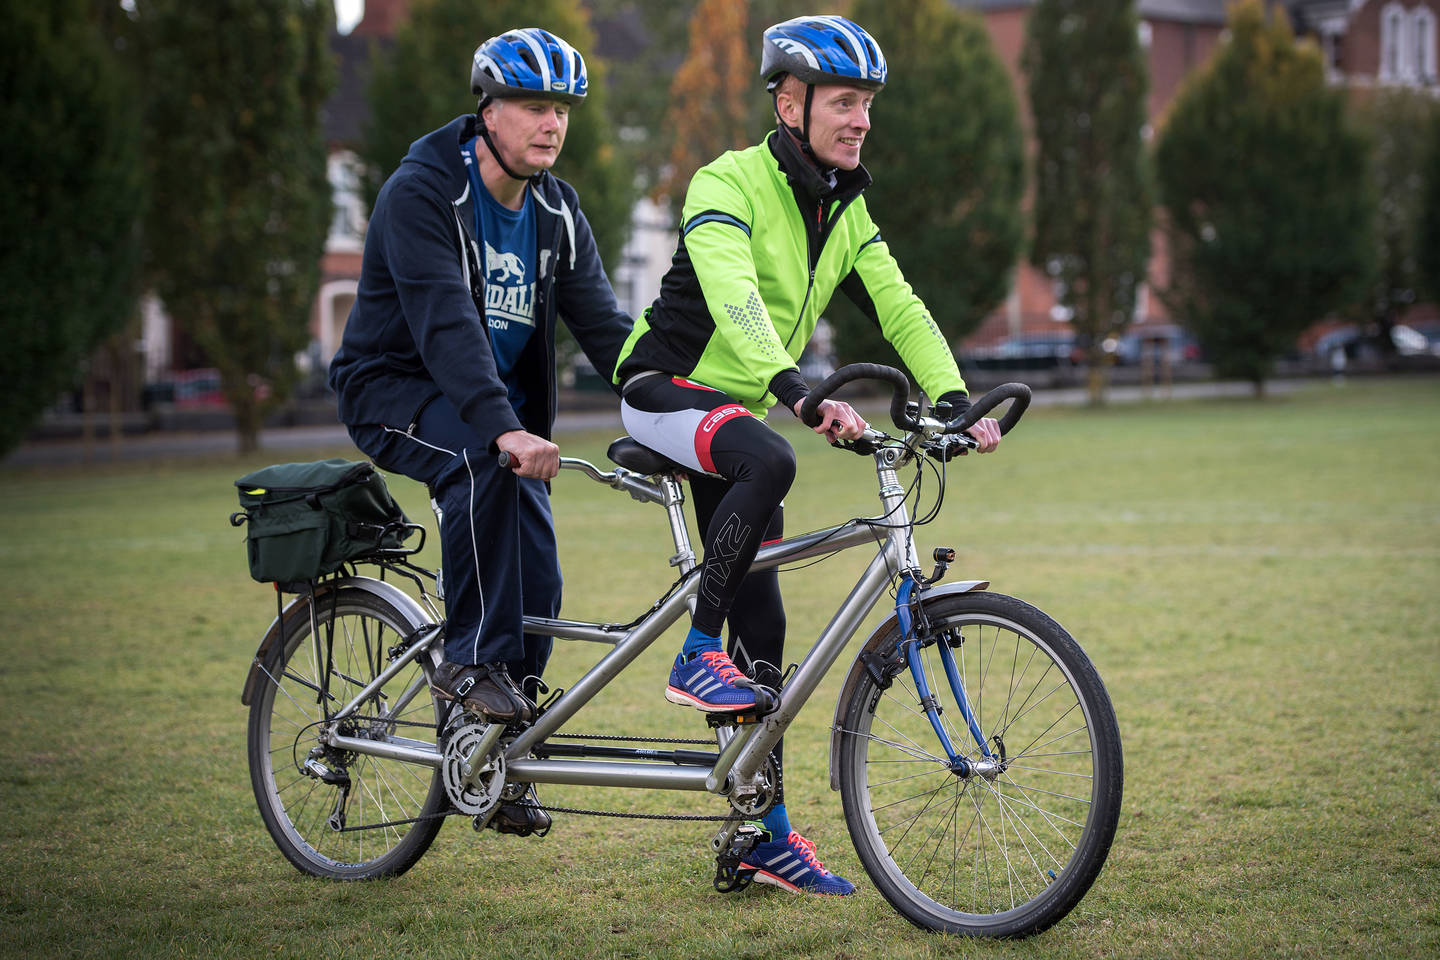 Visually impaired rider and sighted rider on tandem bike. Credit British Blind Sport